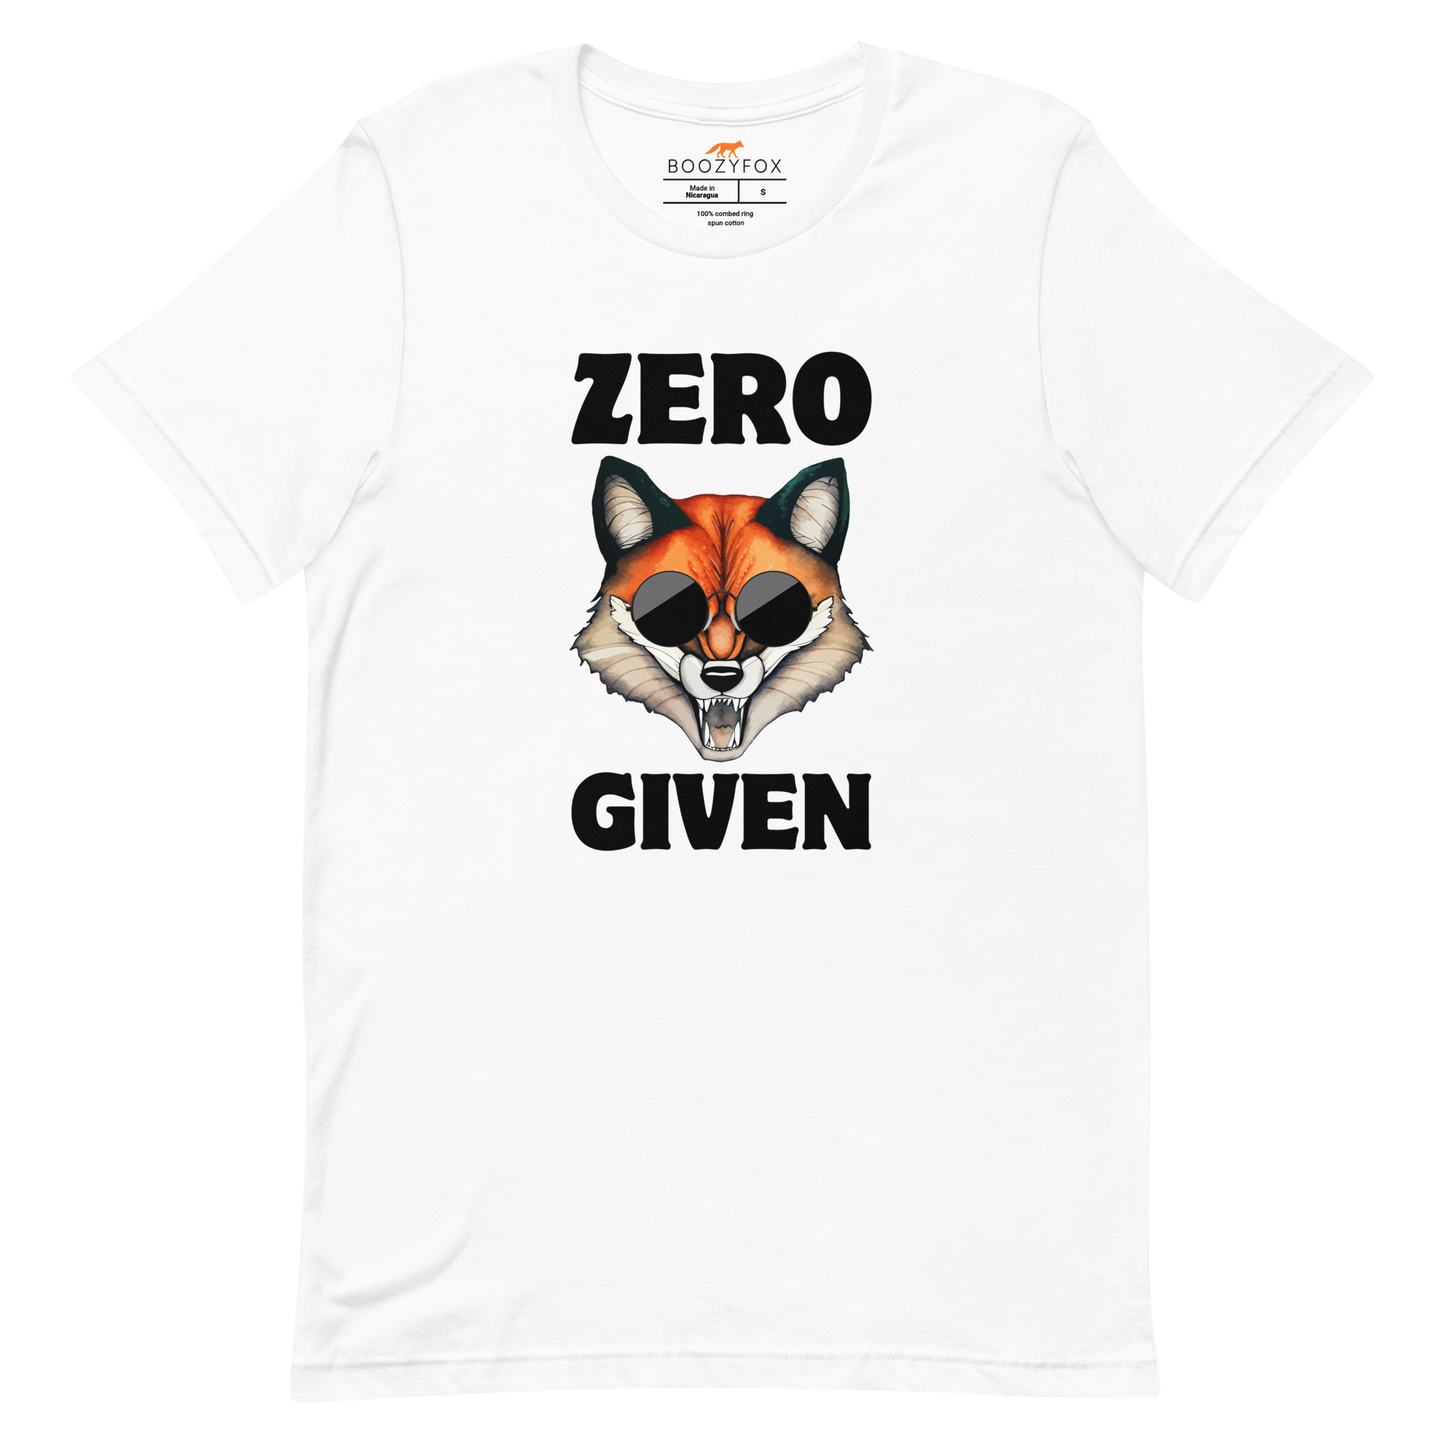 White Premium Fox Tee featuring a Zero Fox Given graphic on the chest - Funny Graphic Fox Tees - Boozy Fox